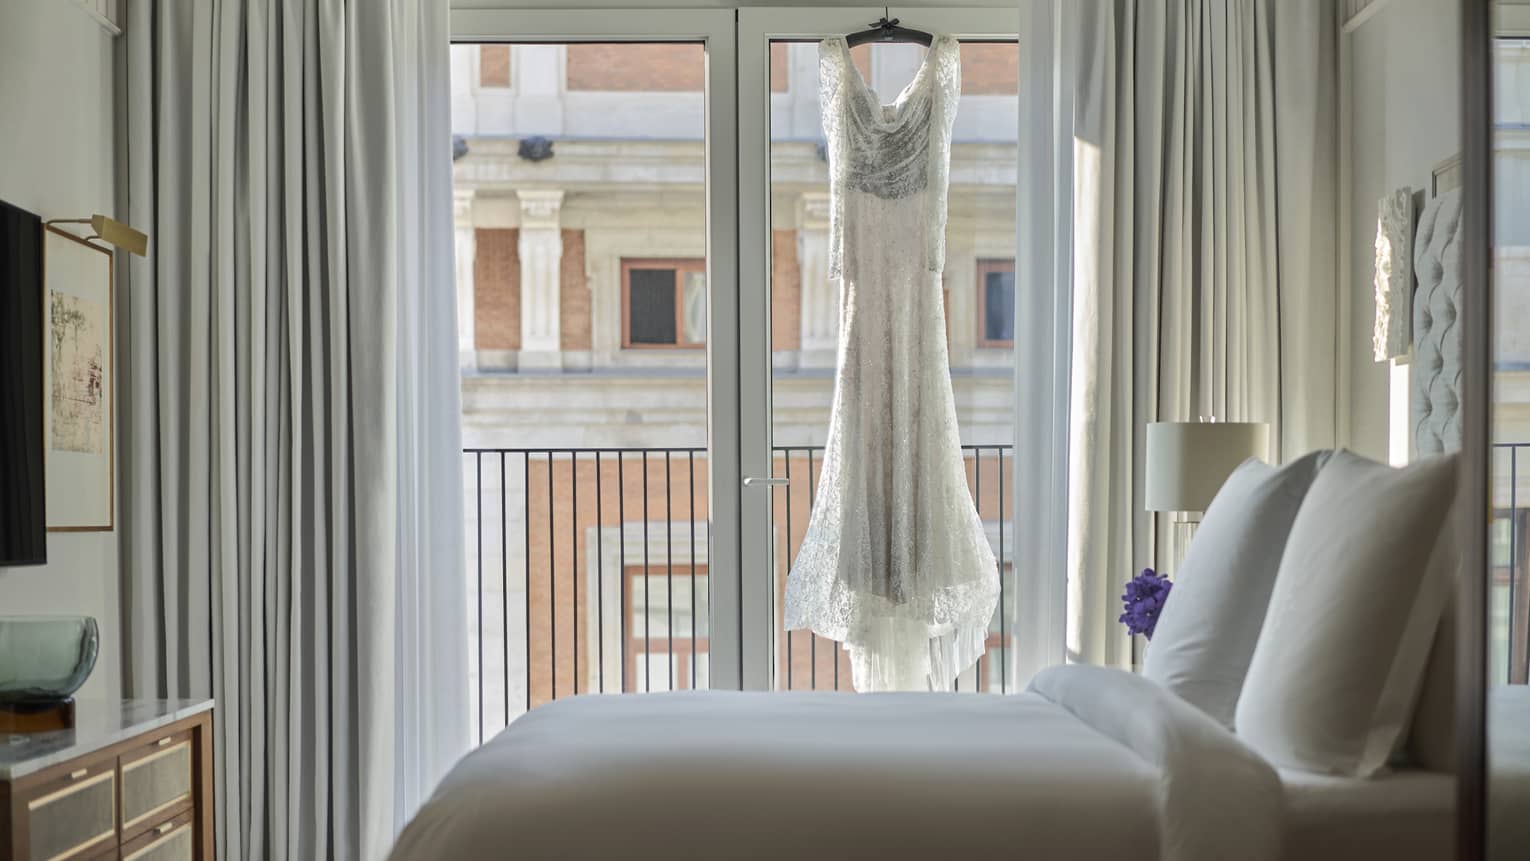 A wedding dress hangs in the window of a deluxe suite.